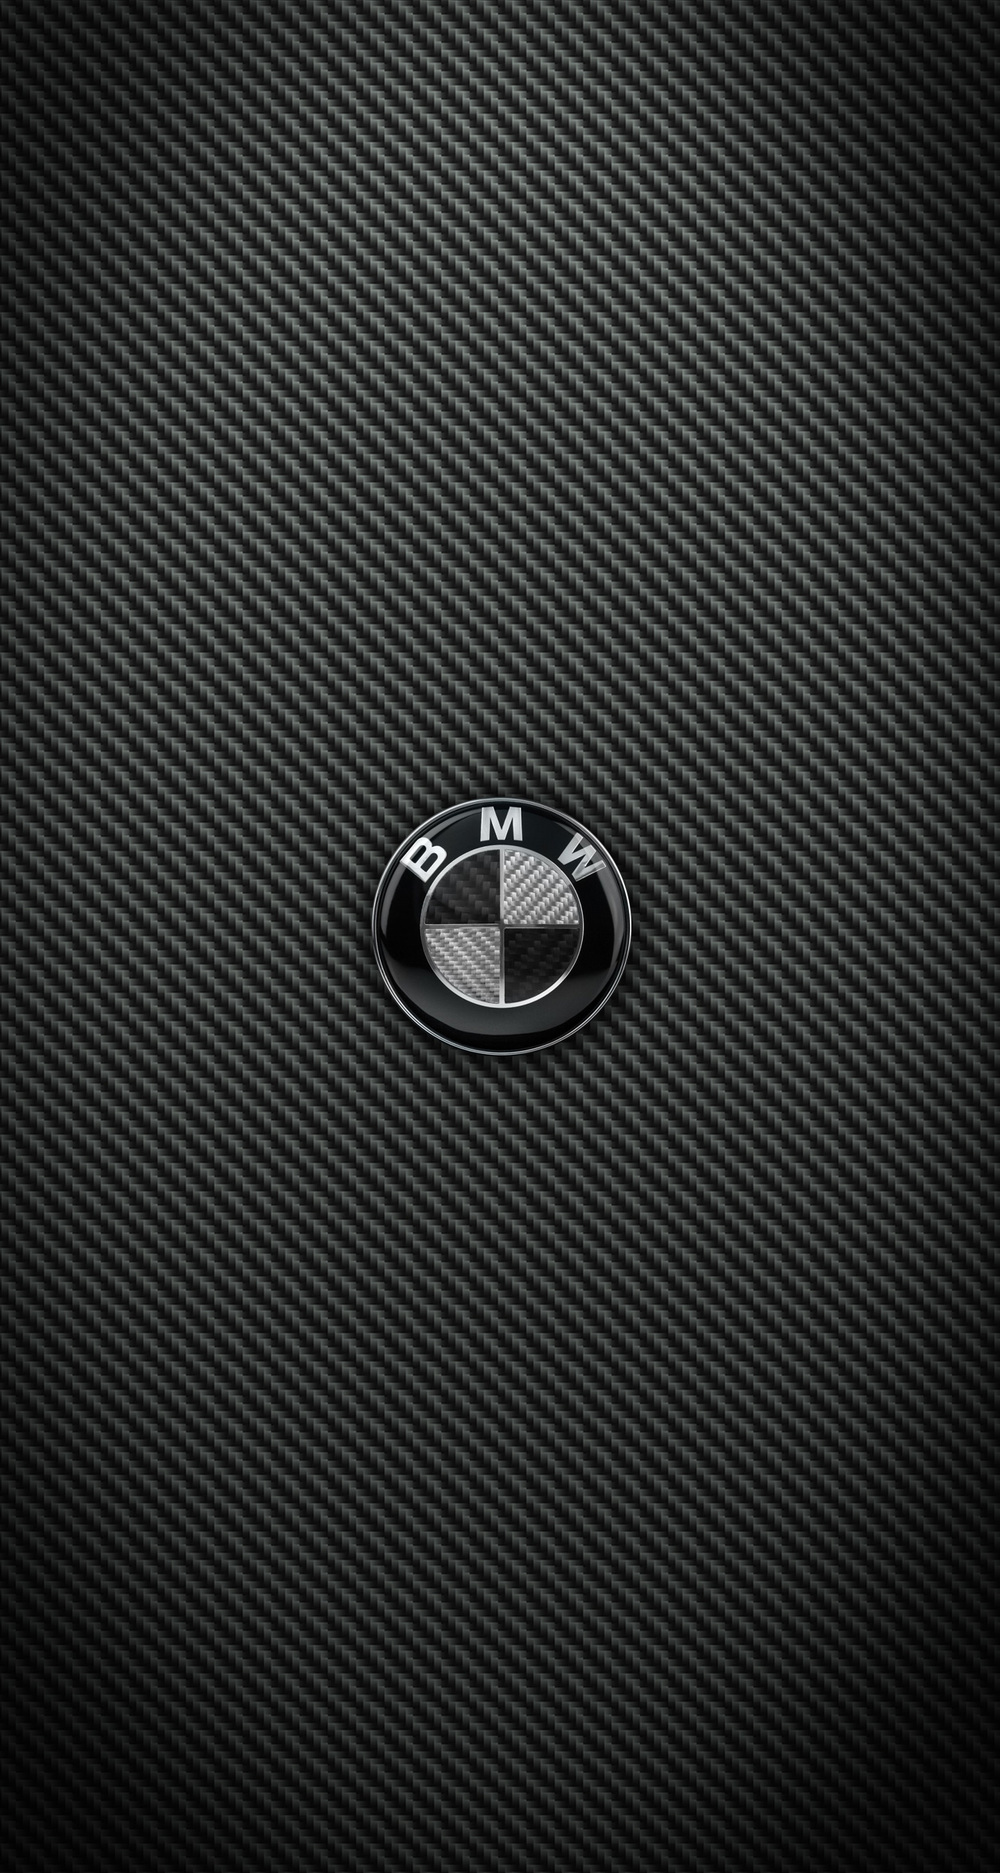 Carbon Fiber Bmw And M Power iPhone Wallpaper For Plus